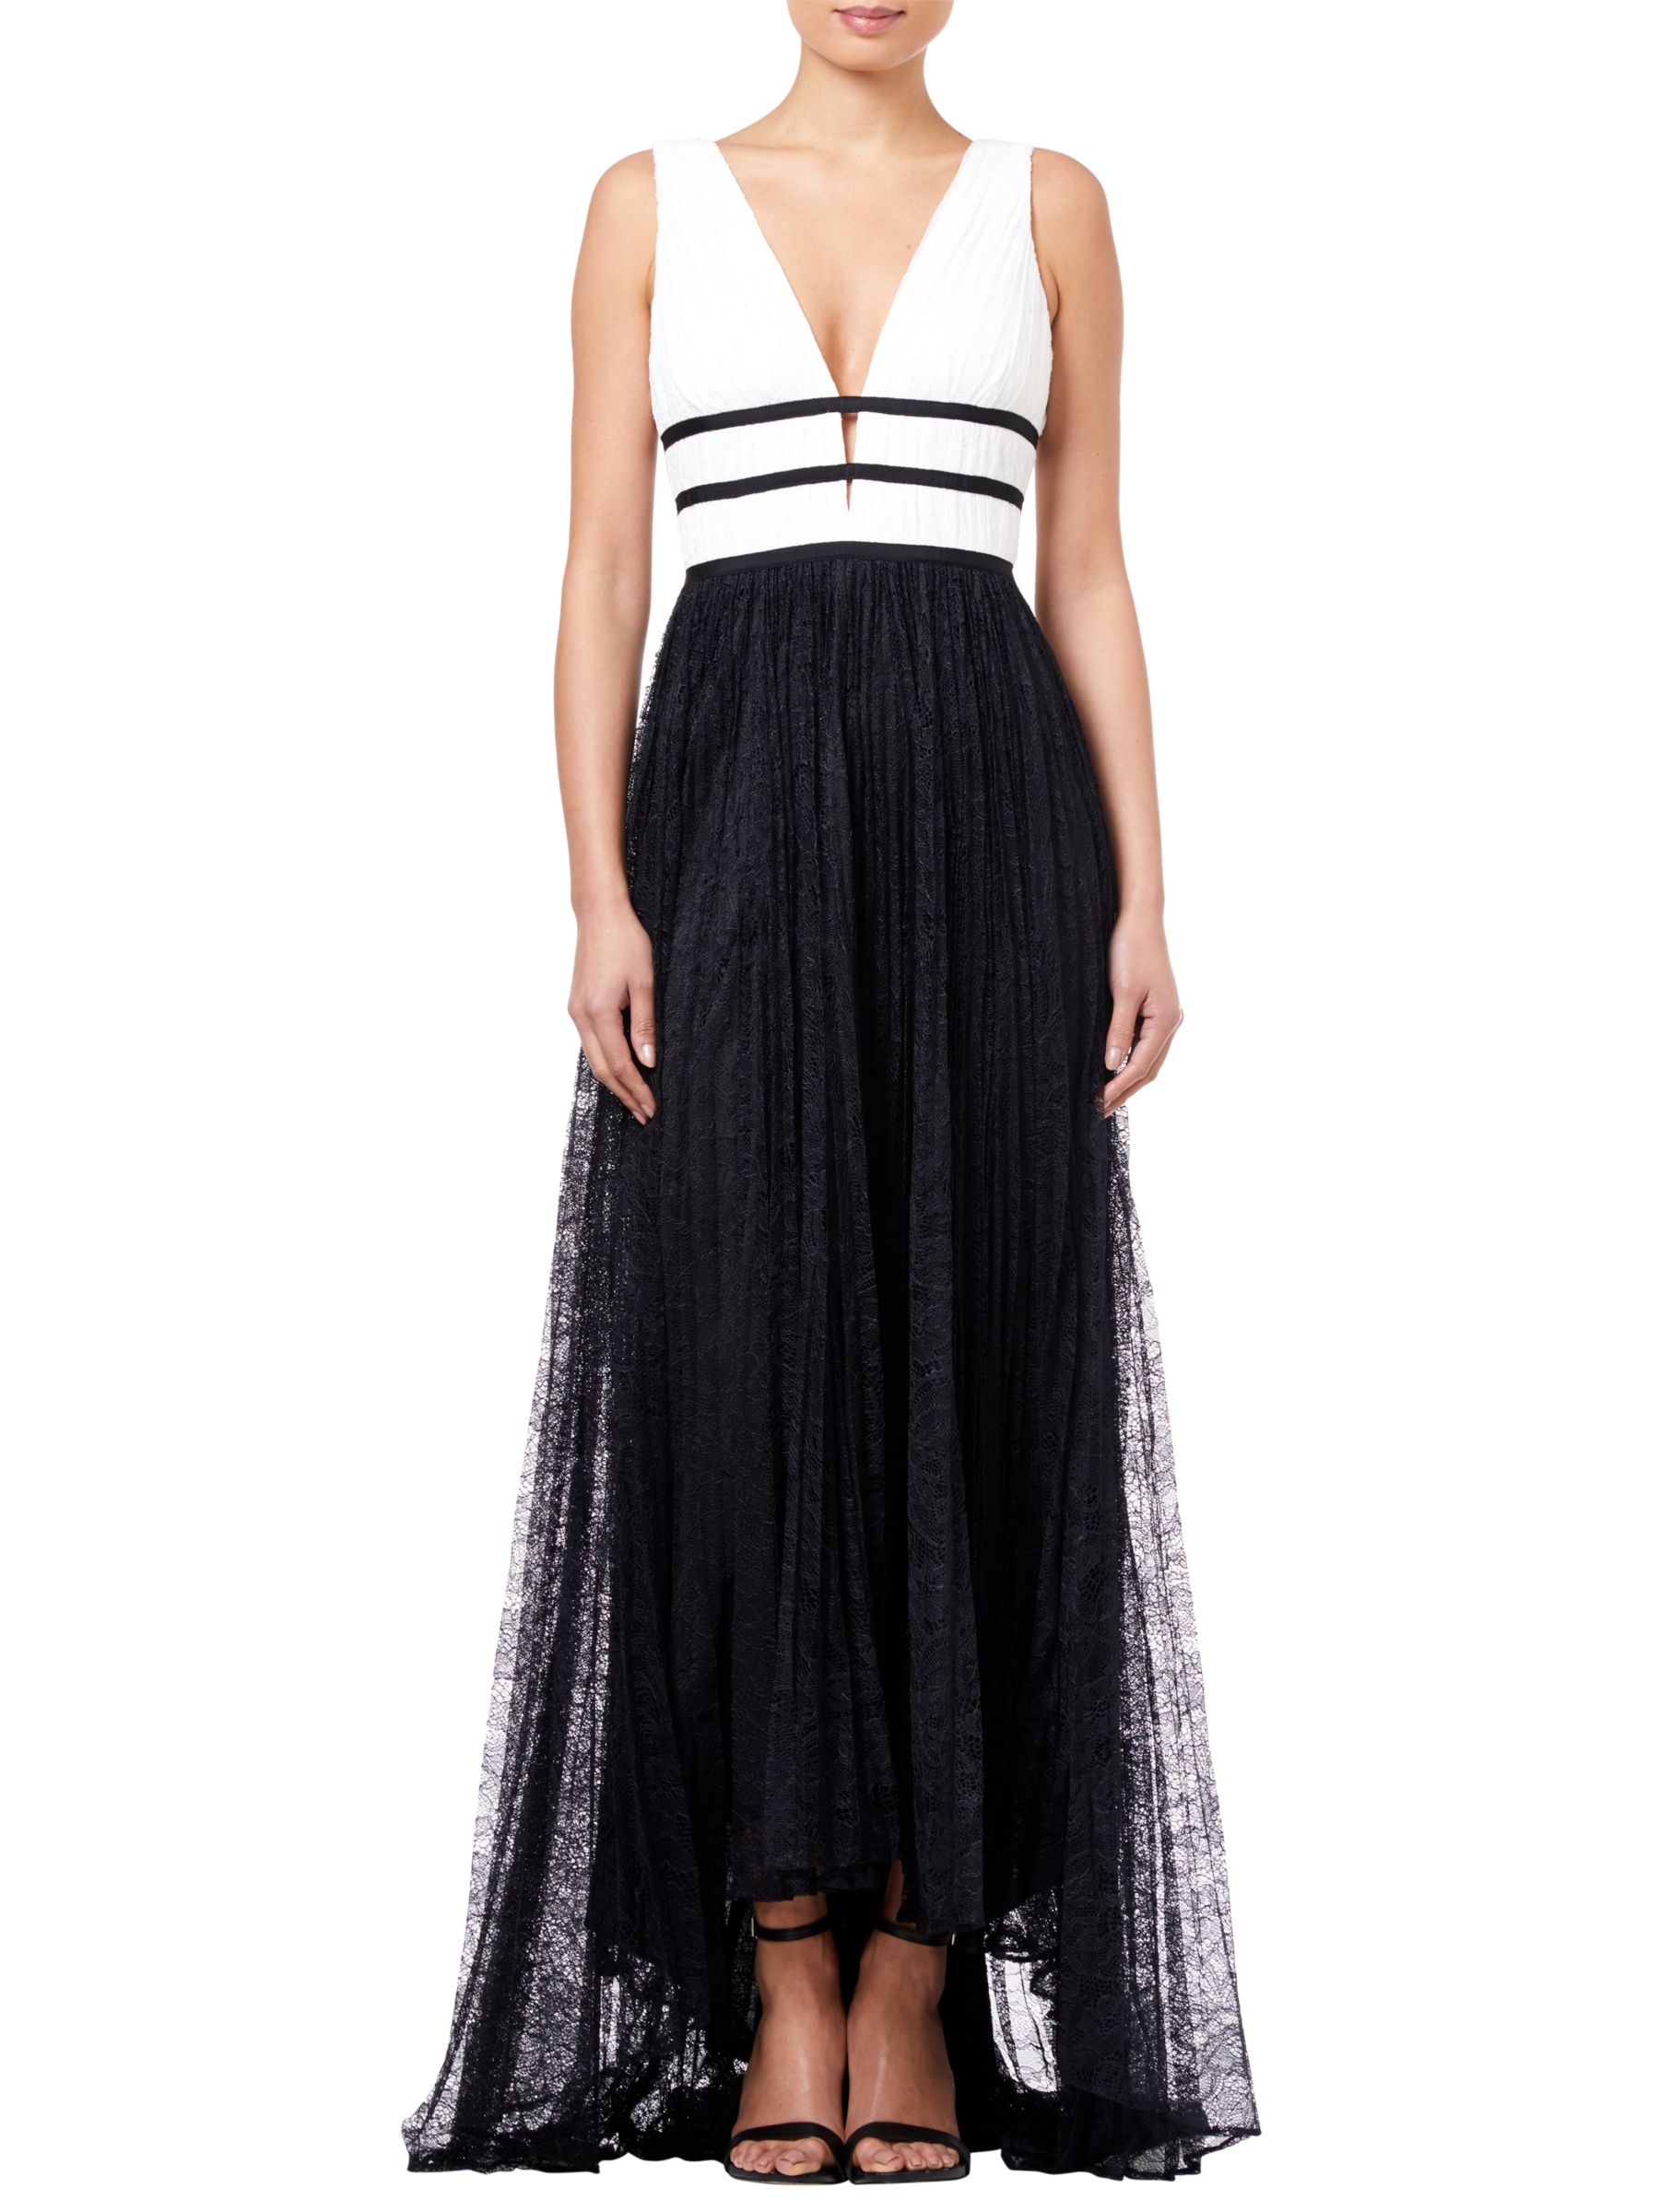 Adrianna Papell Lace Long Dress, Black/White